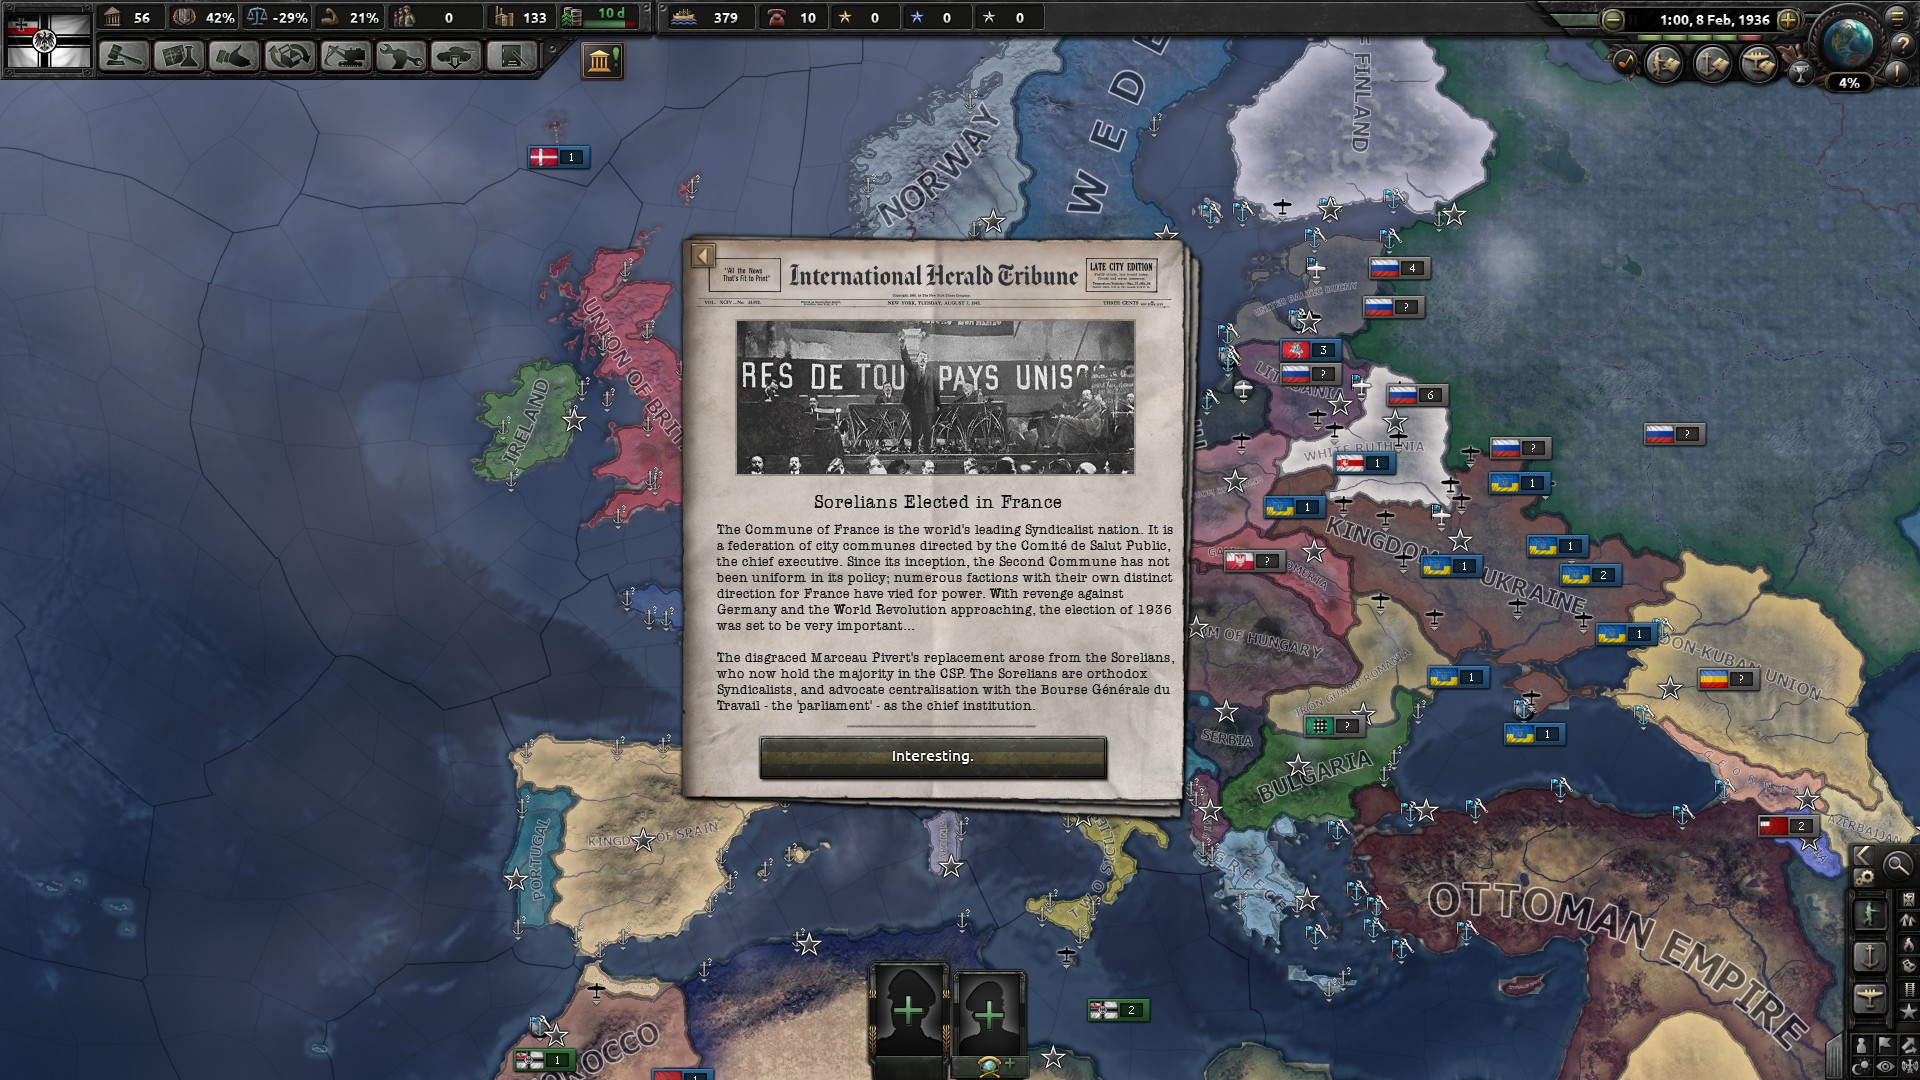 hearts of iron 4 how to install mods without steam